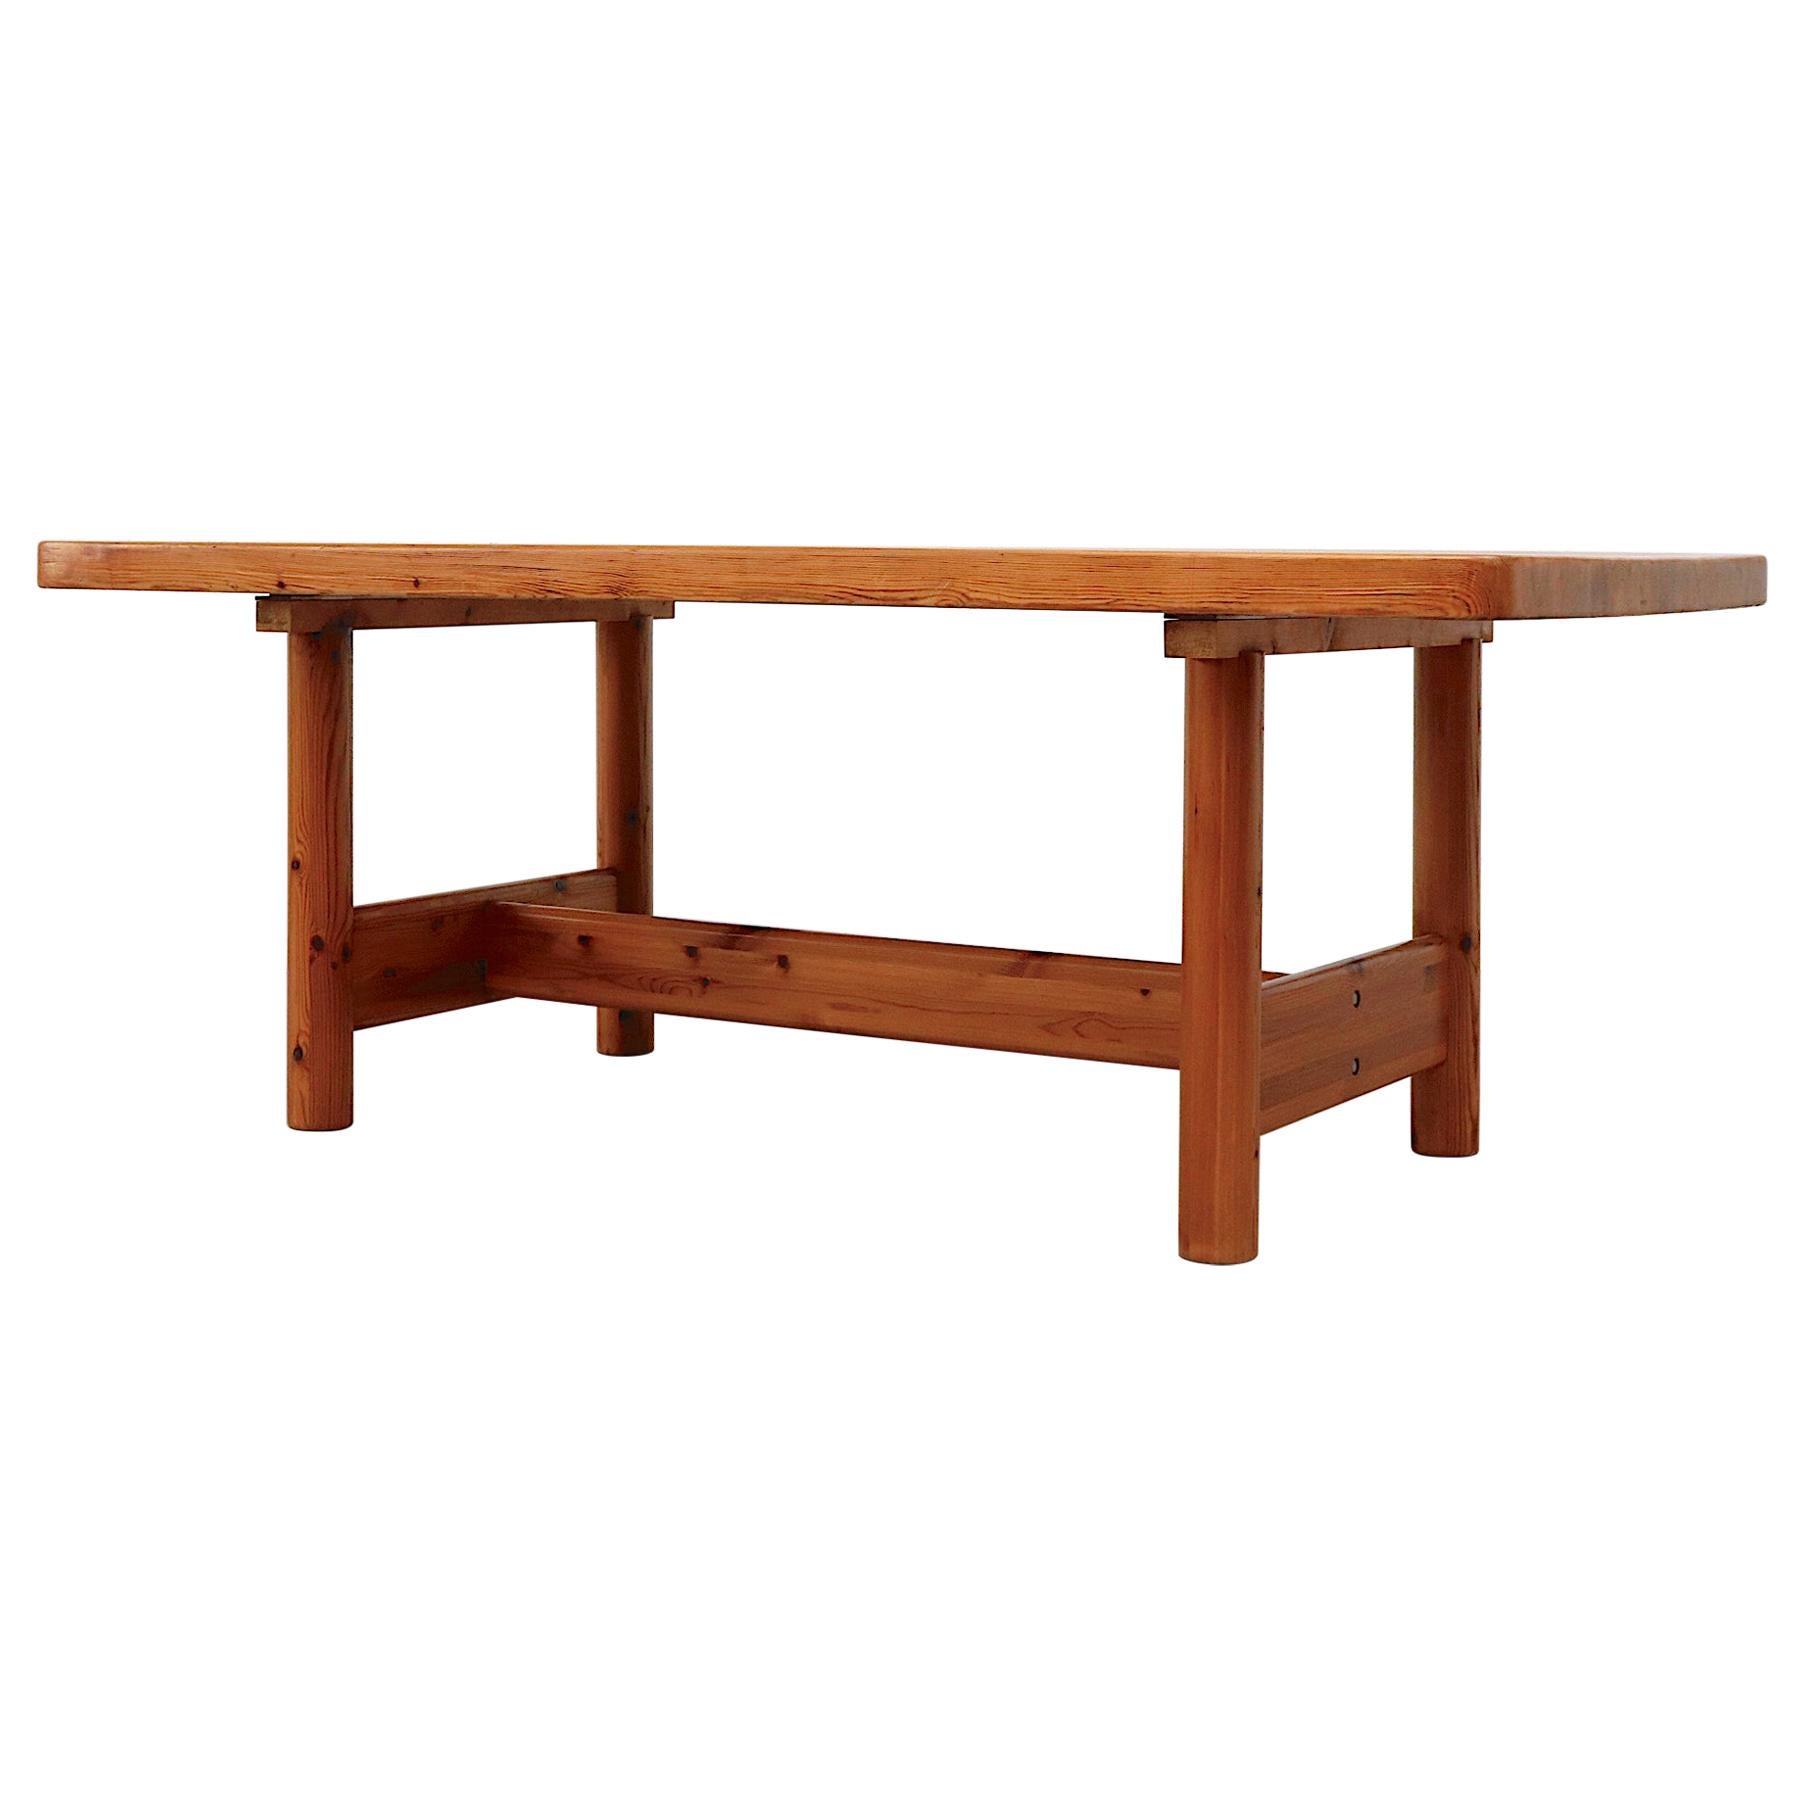 Large Pine Rainer Daumiller Dining Table with Trestle Base